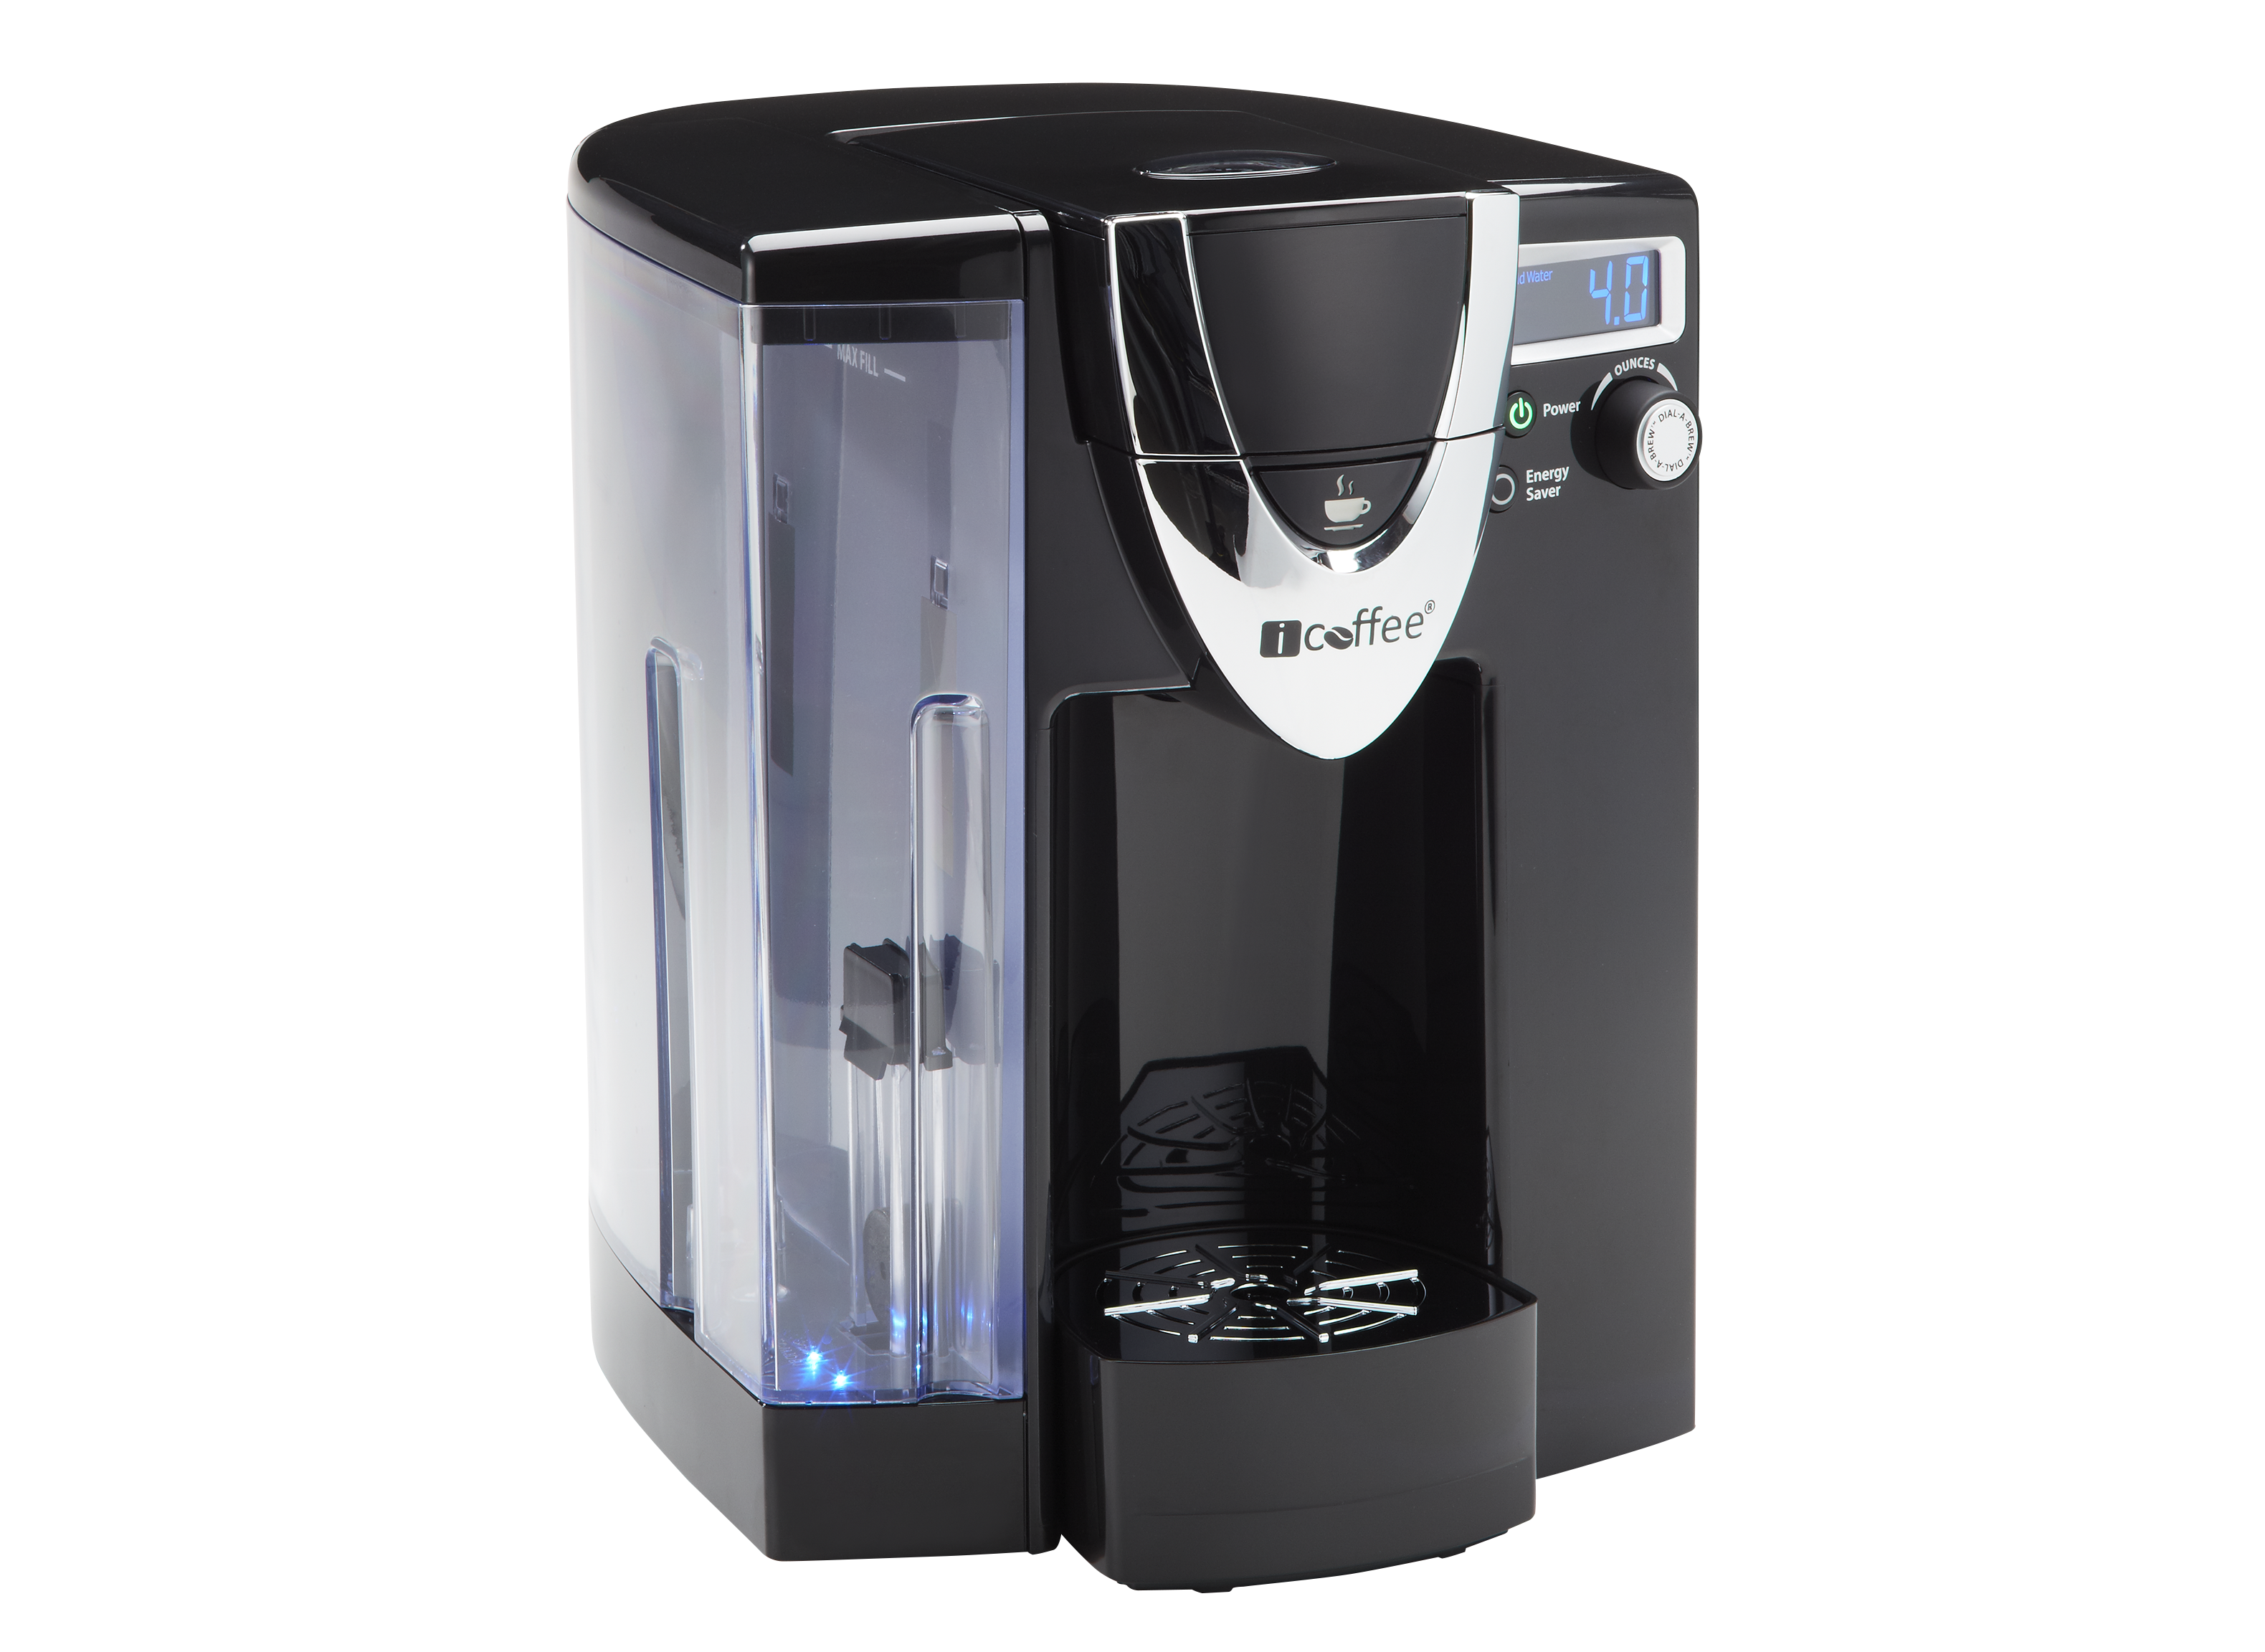 https://crdms.images.consumerreports.org/prod/products/cr/models/291729-podcoffeemakers-icoffee-opussingleservebrewer.png